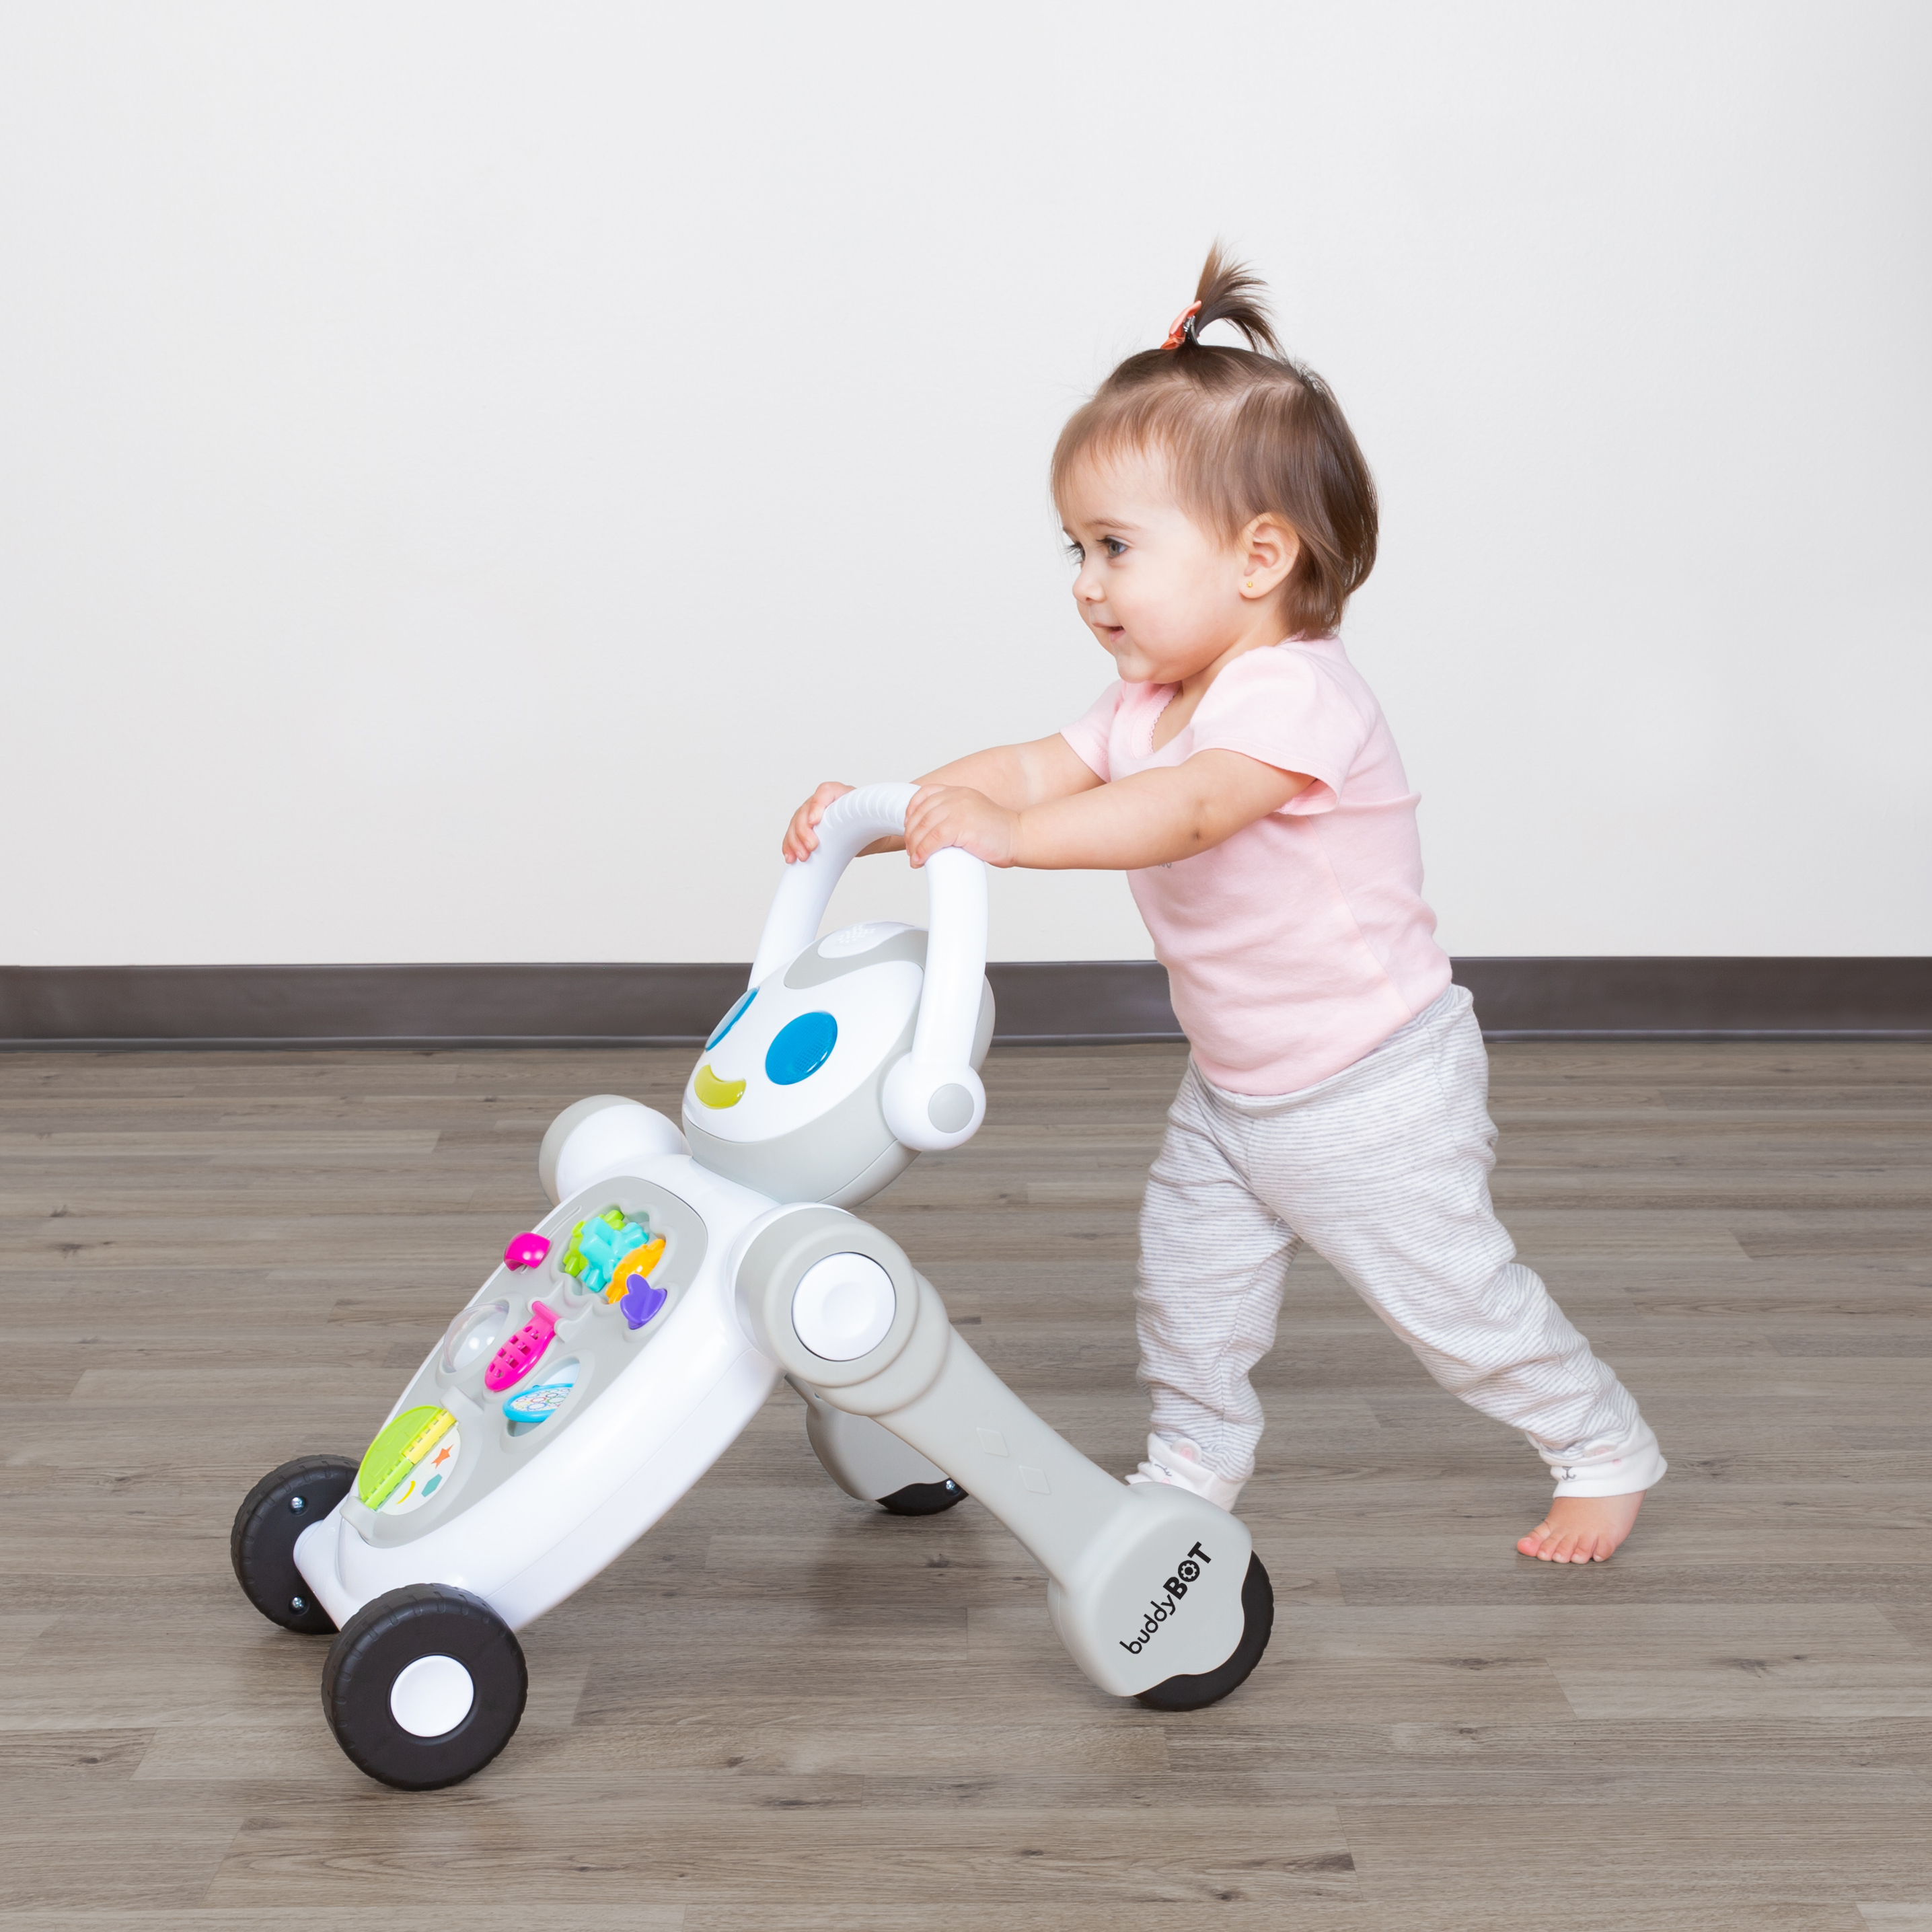 Smart Steps by Baby Trend Buddy Bot 2-in-1 Push Walker and STEM Learning - image 5 of 10